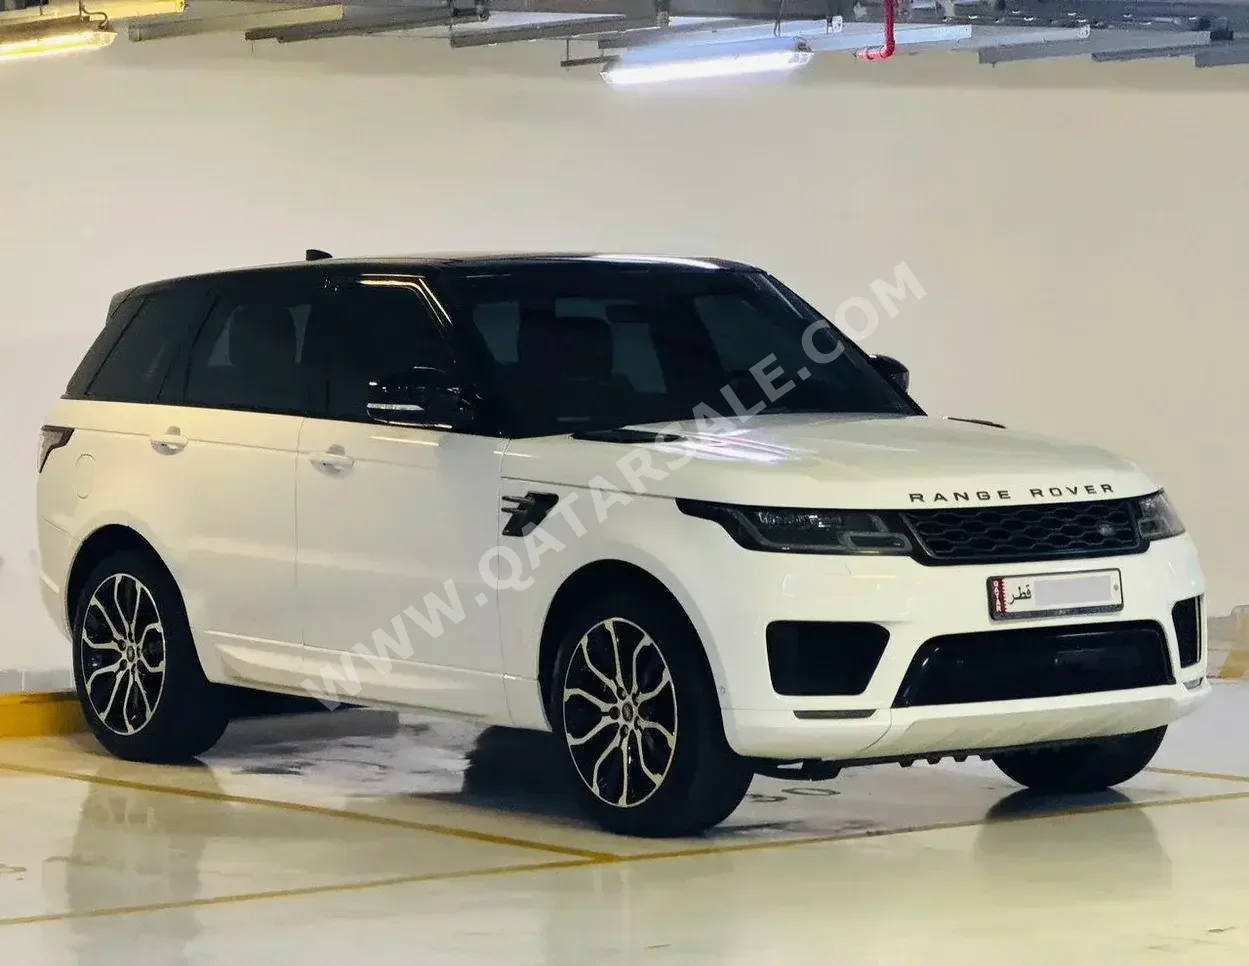 Land Rover  Range Rover  Sport Dynamic  2020  Automatic  144,000 Km  8 Cylinder  Four Wheel Drive (4WD)  SUV  White  With Warranty